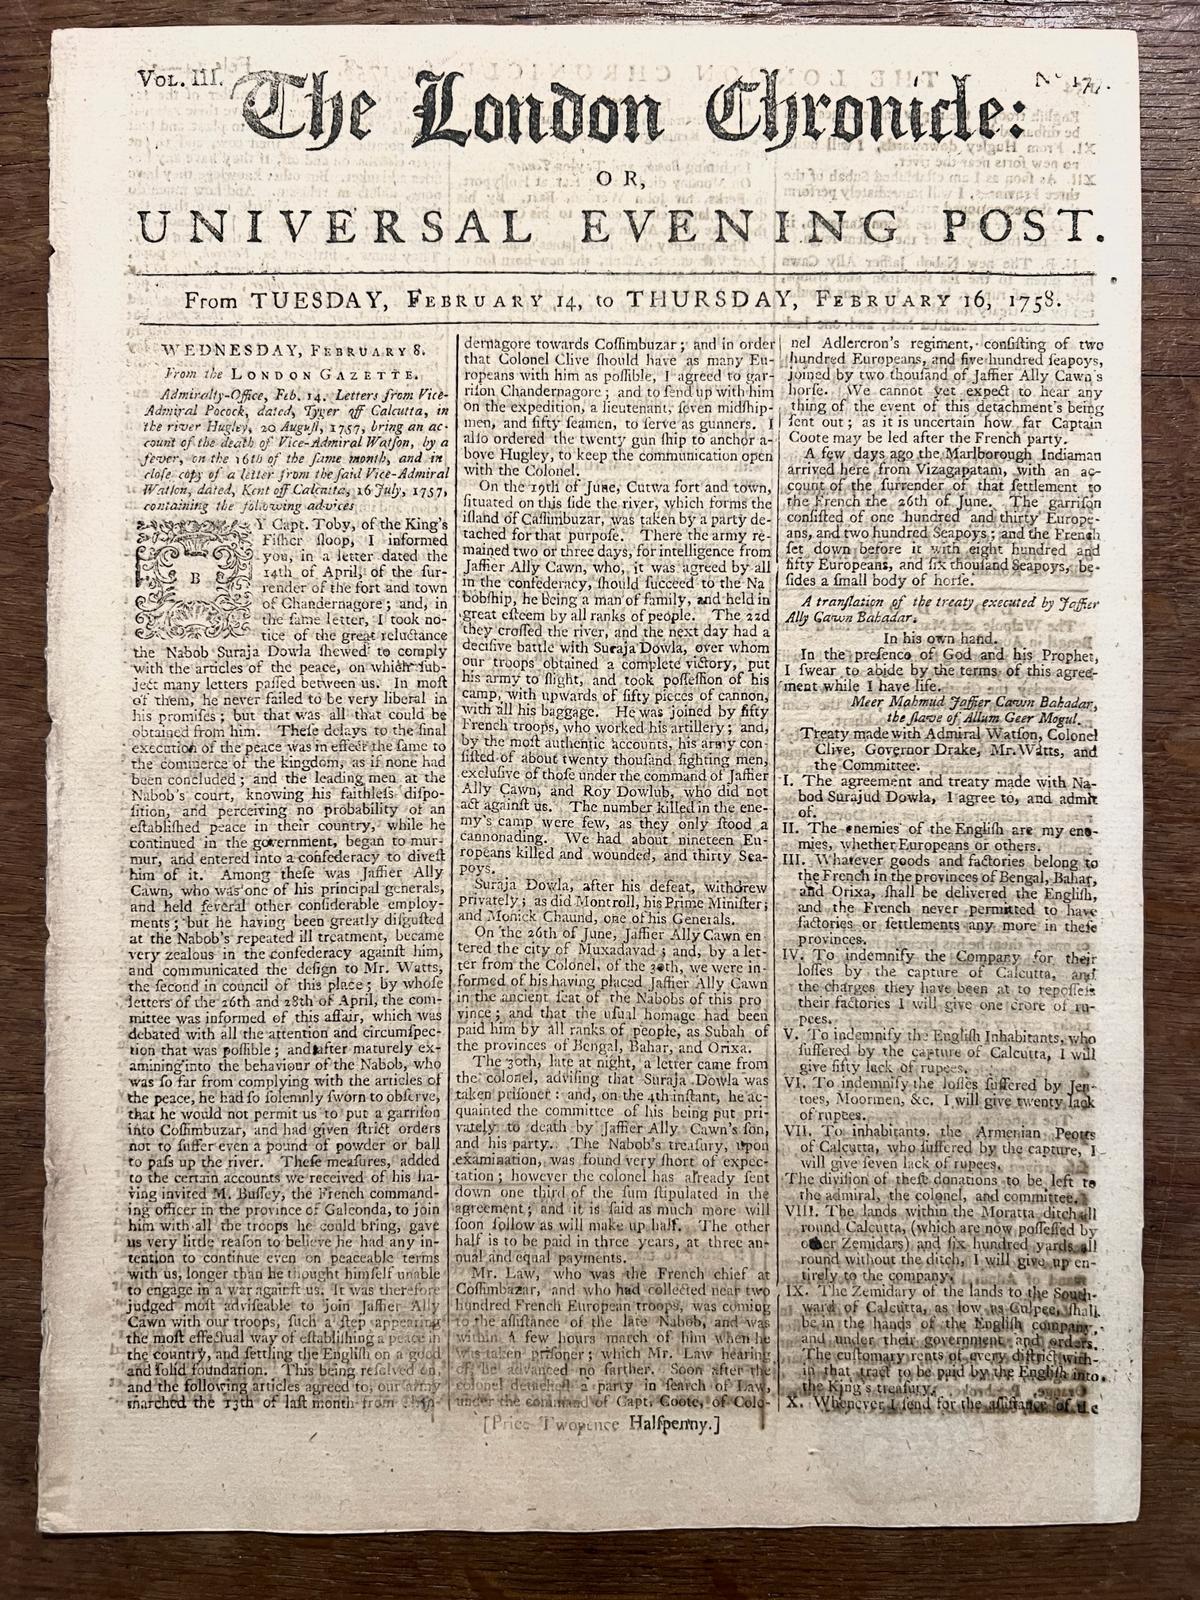 [British newspaper 1758] - Antique newspaper UK 1758 | The London Chronicle or Universal Evening Post, Vol. III, no 187 March 9-11 1758. Original newspaper on laid paper, 8 pp (p. 233-240).